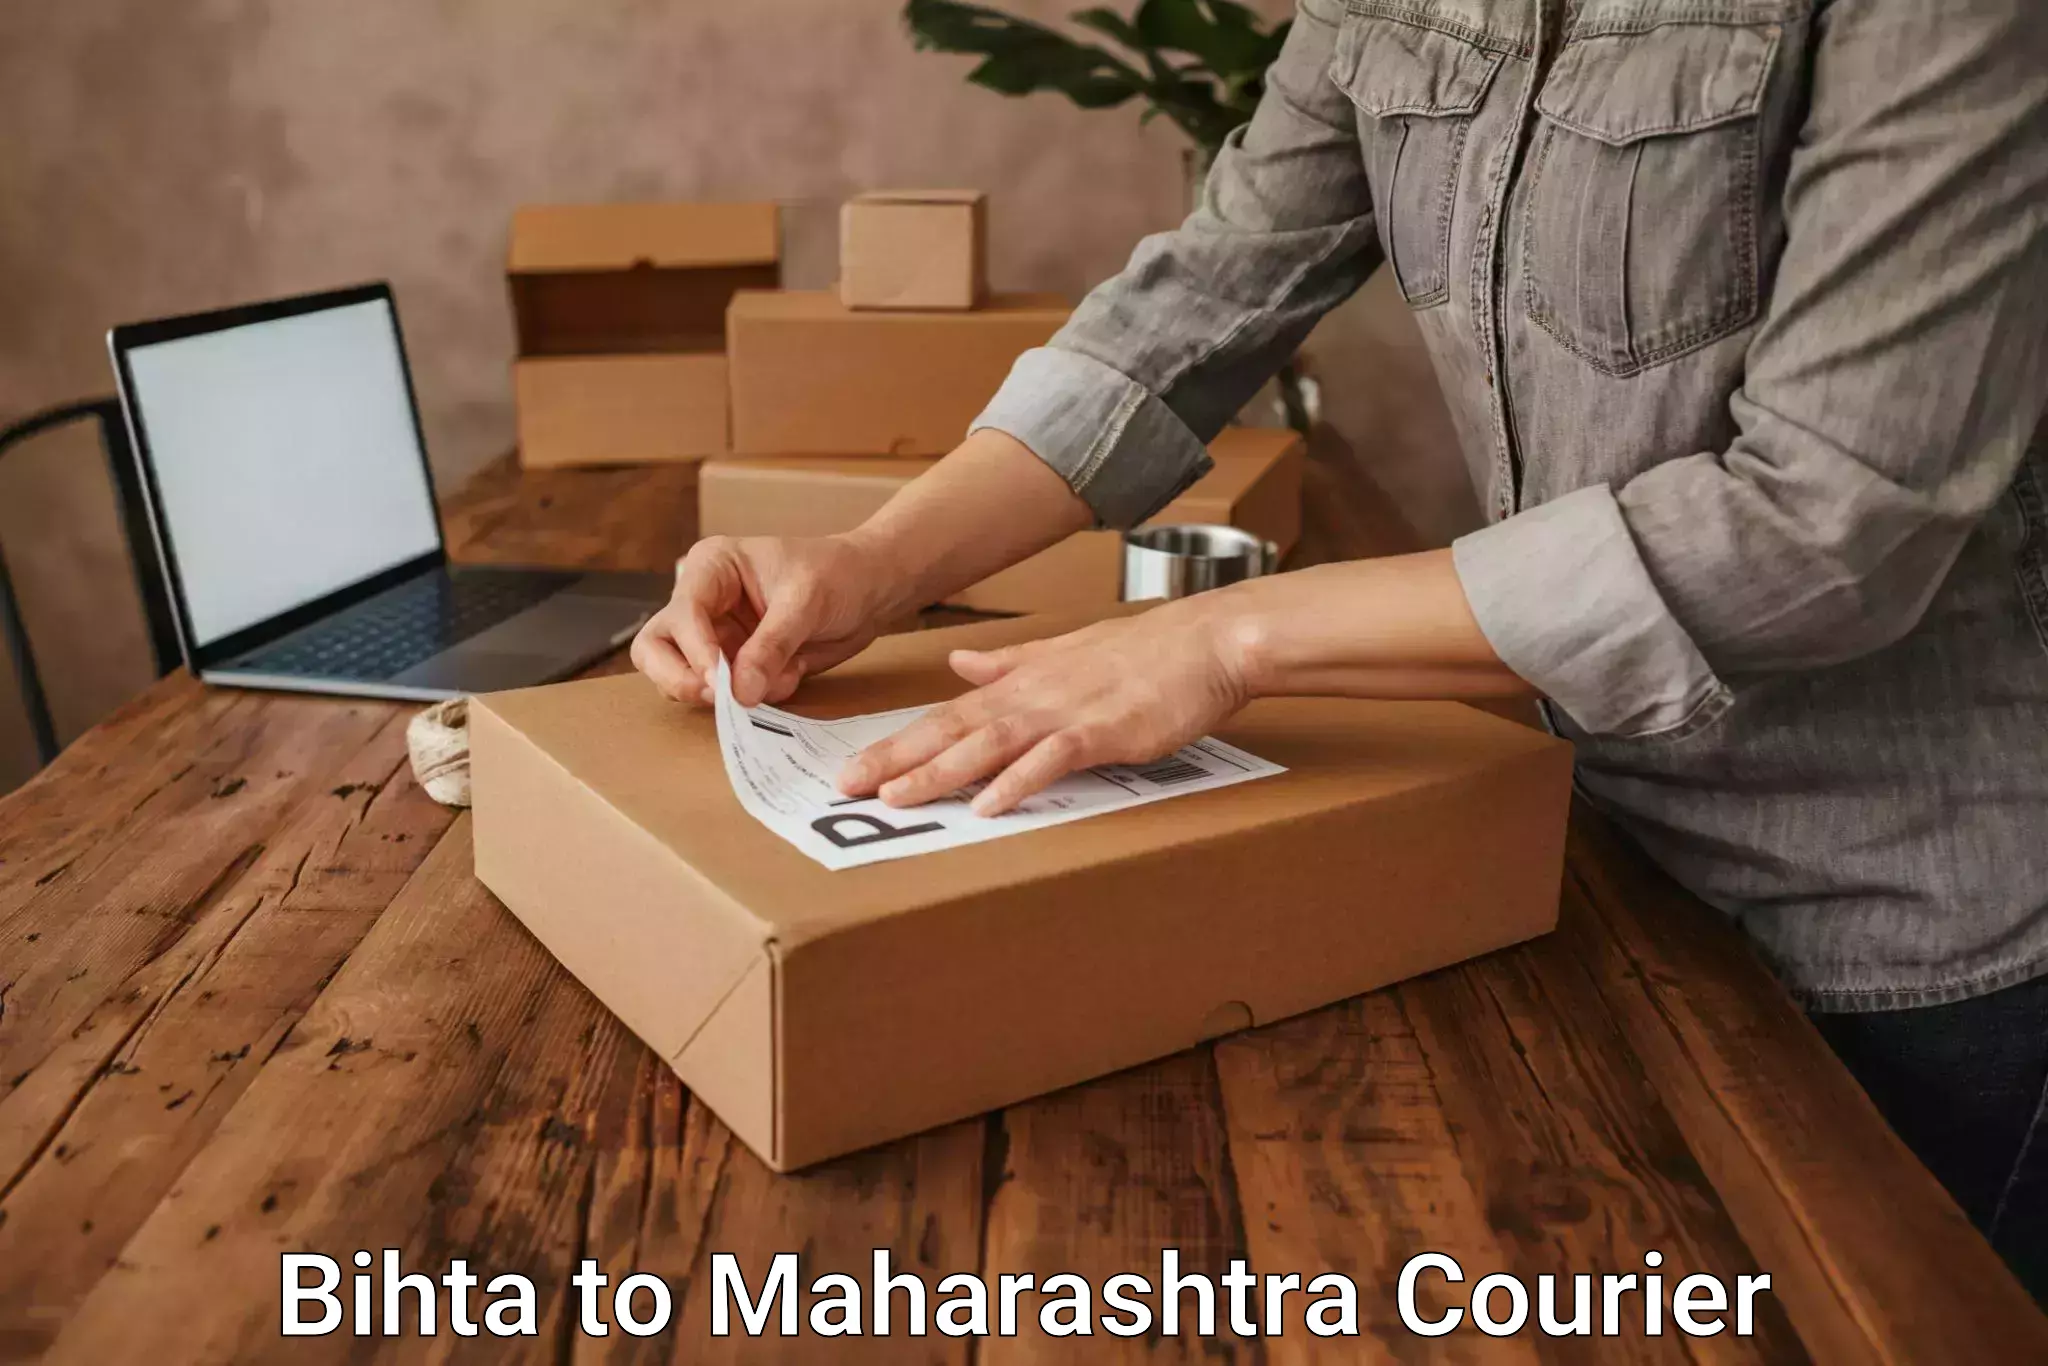 Reliable moving assistance in Bihta to Chandrapur